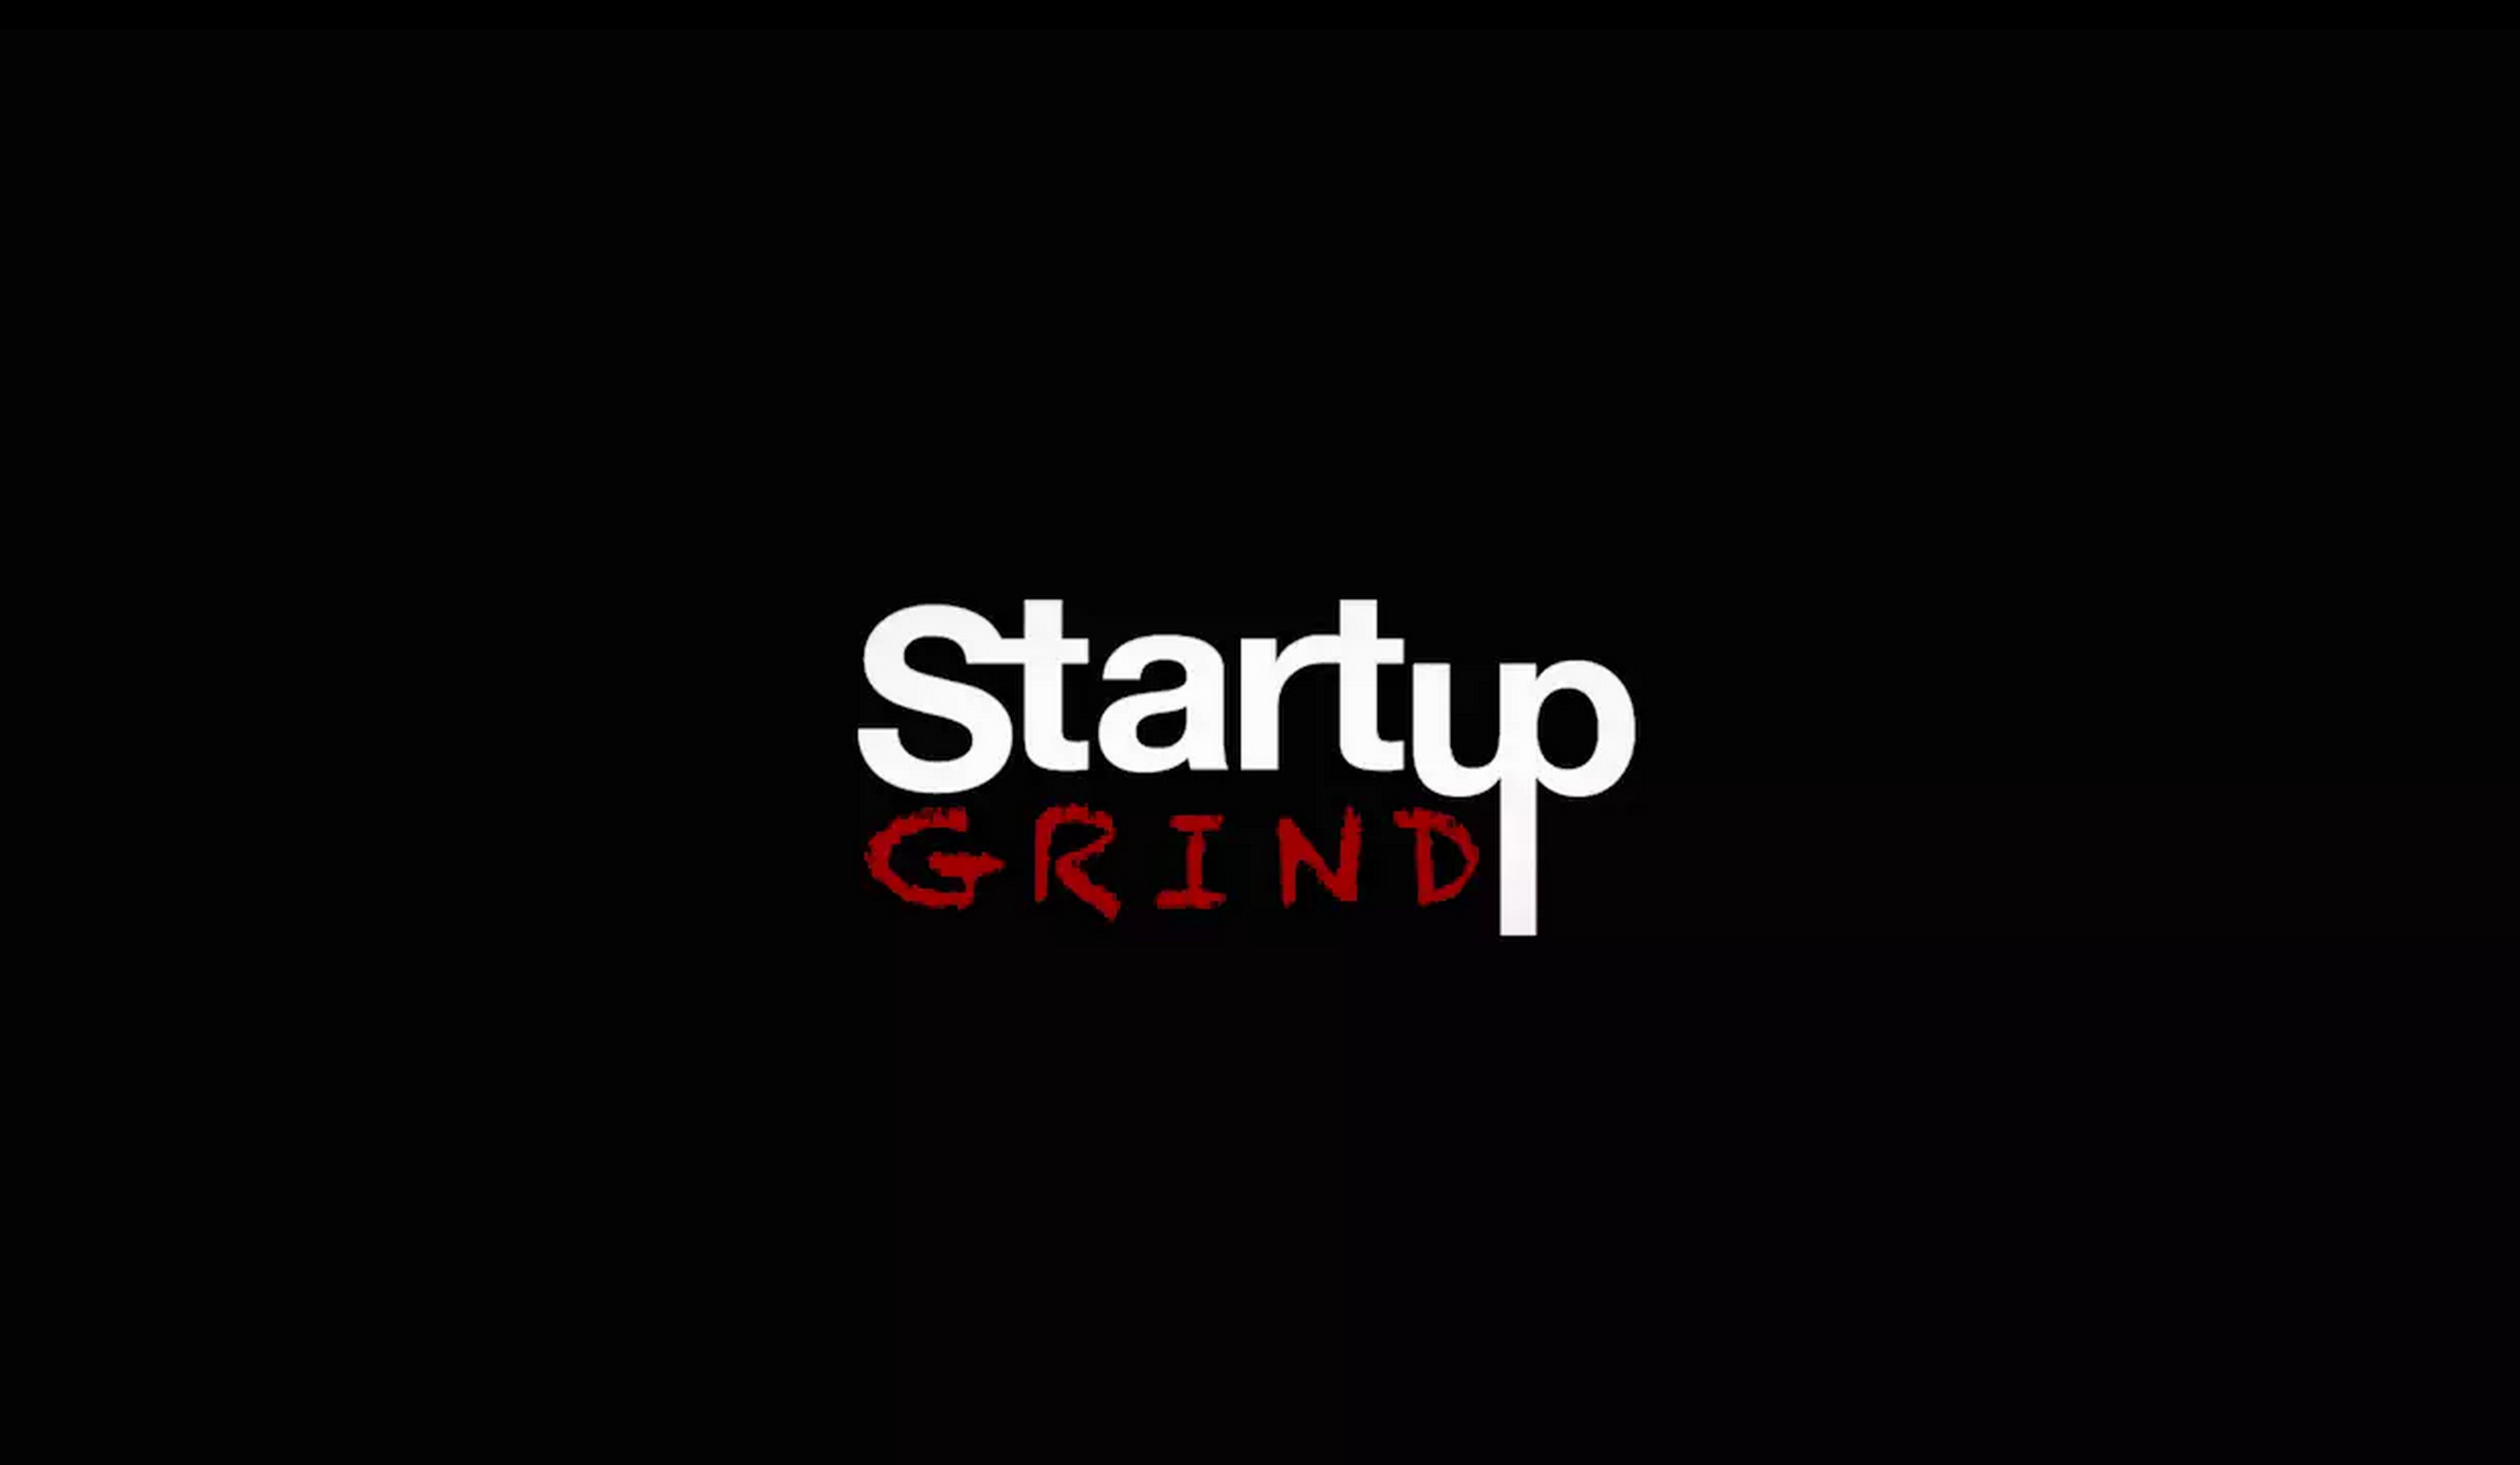 SENPEX TECHNOLOGIES SELECTED AS TOP STARTUP EXHIBITOR AT STARTUP GRIND GLOBAL CONFERENCE 2023 IN SILICON VALLEY